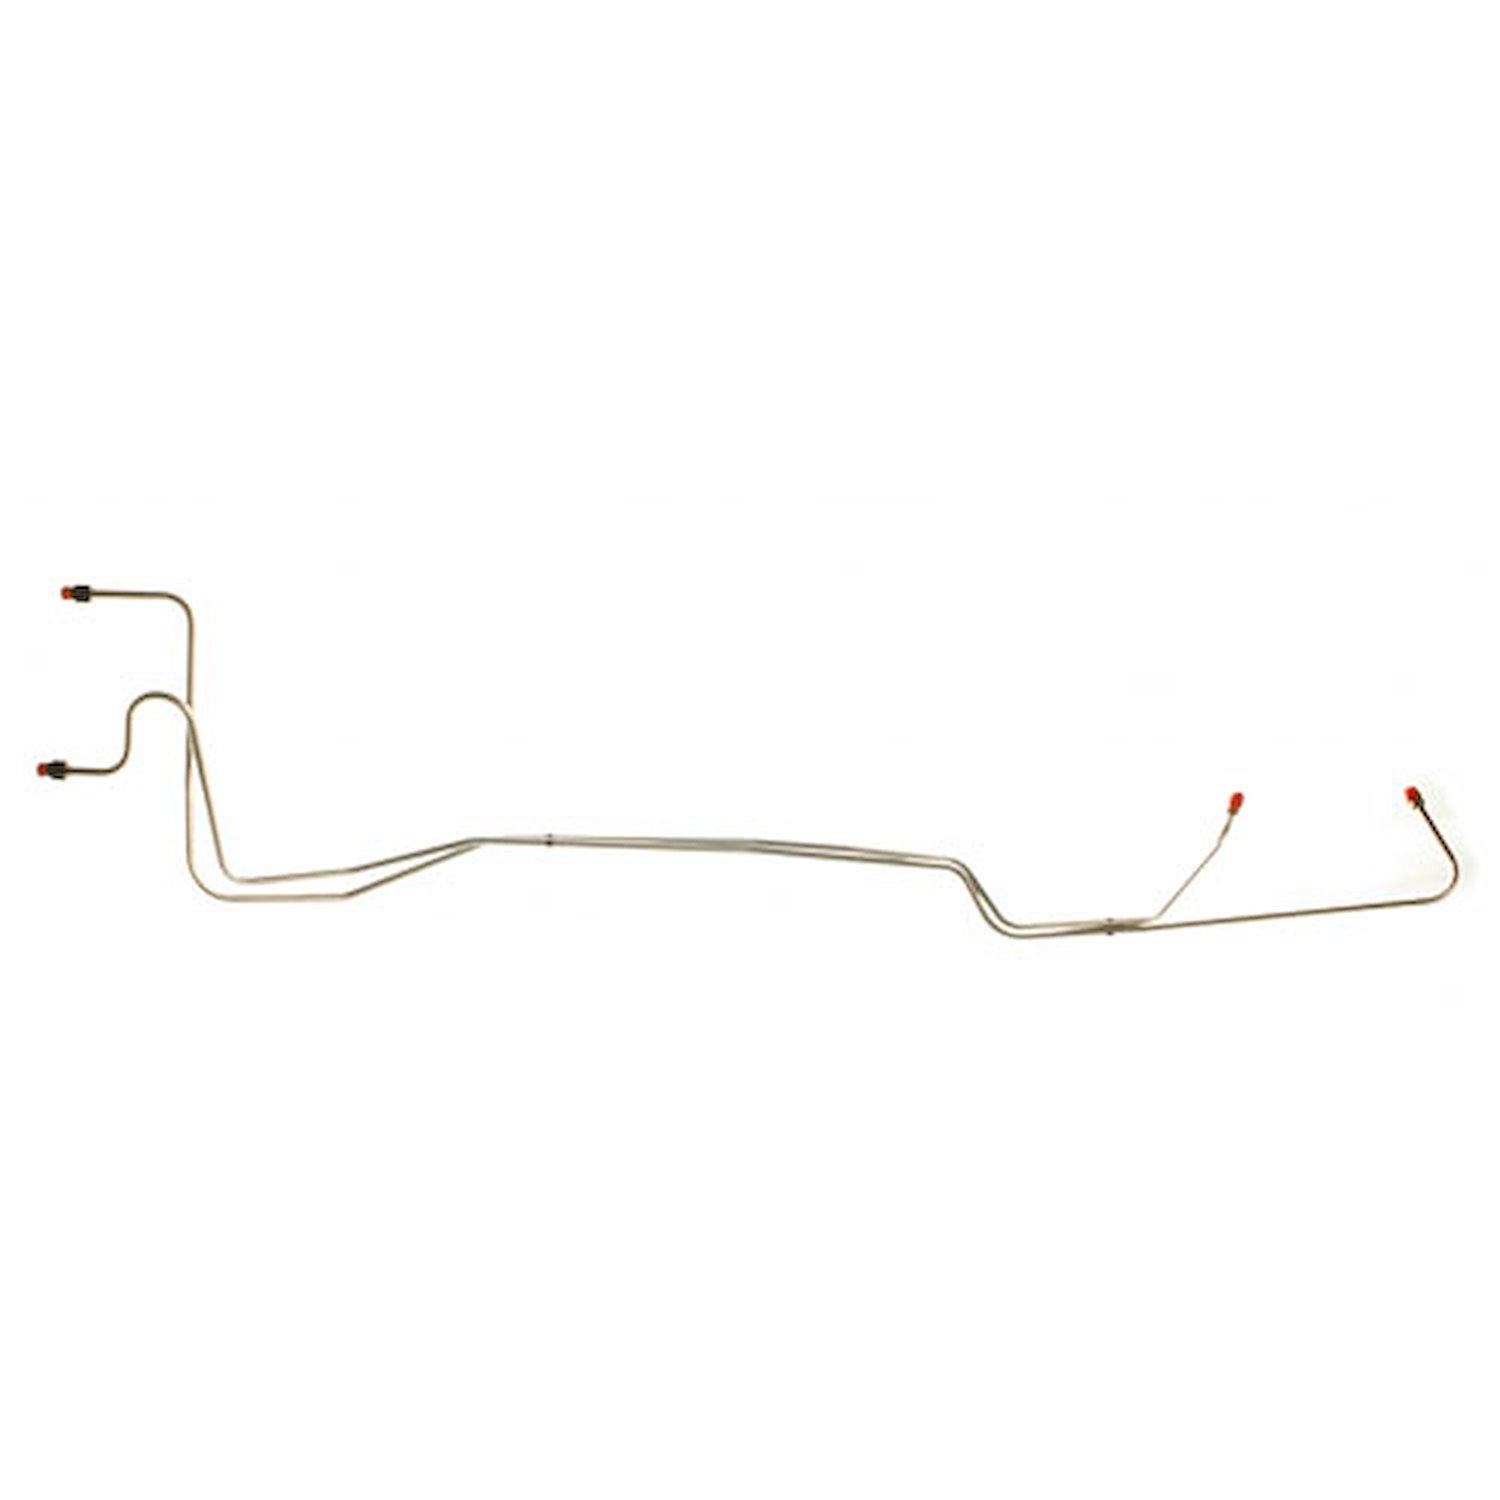 Stainless Steel Transmission Cooler Lines 1967-70 Ford Mustang,